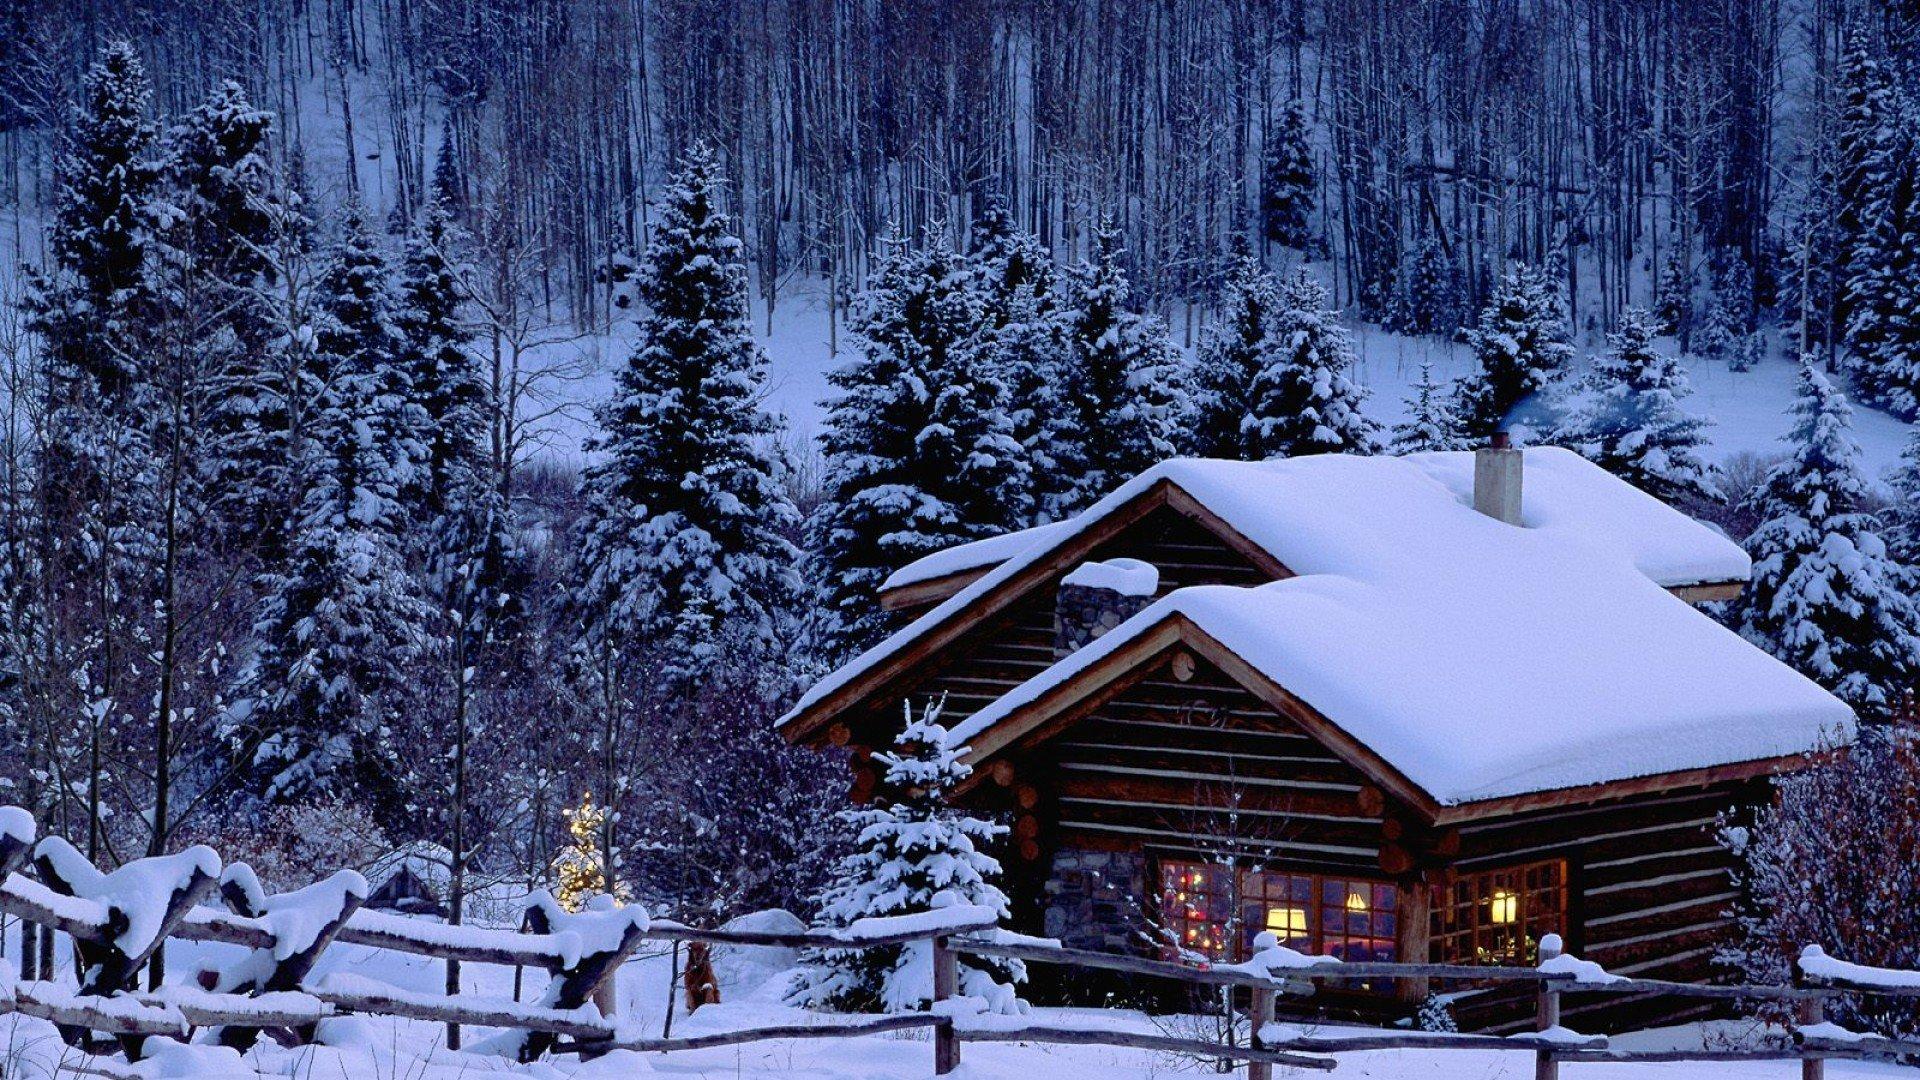 Christmas, Snow, Pine trees, Cabin HD Wallpapers / Desktop and Mobile Image & Photos